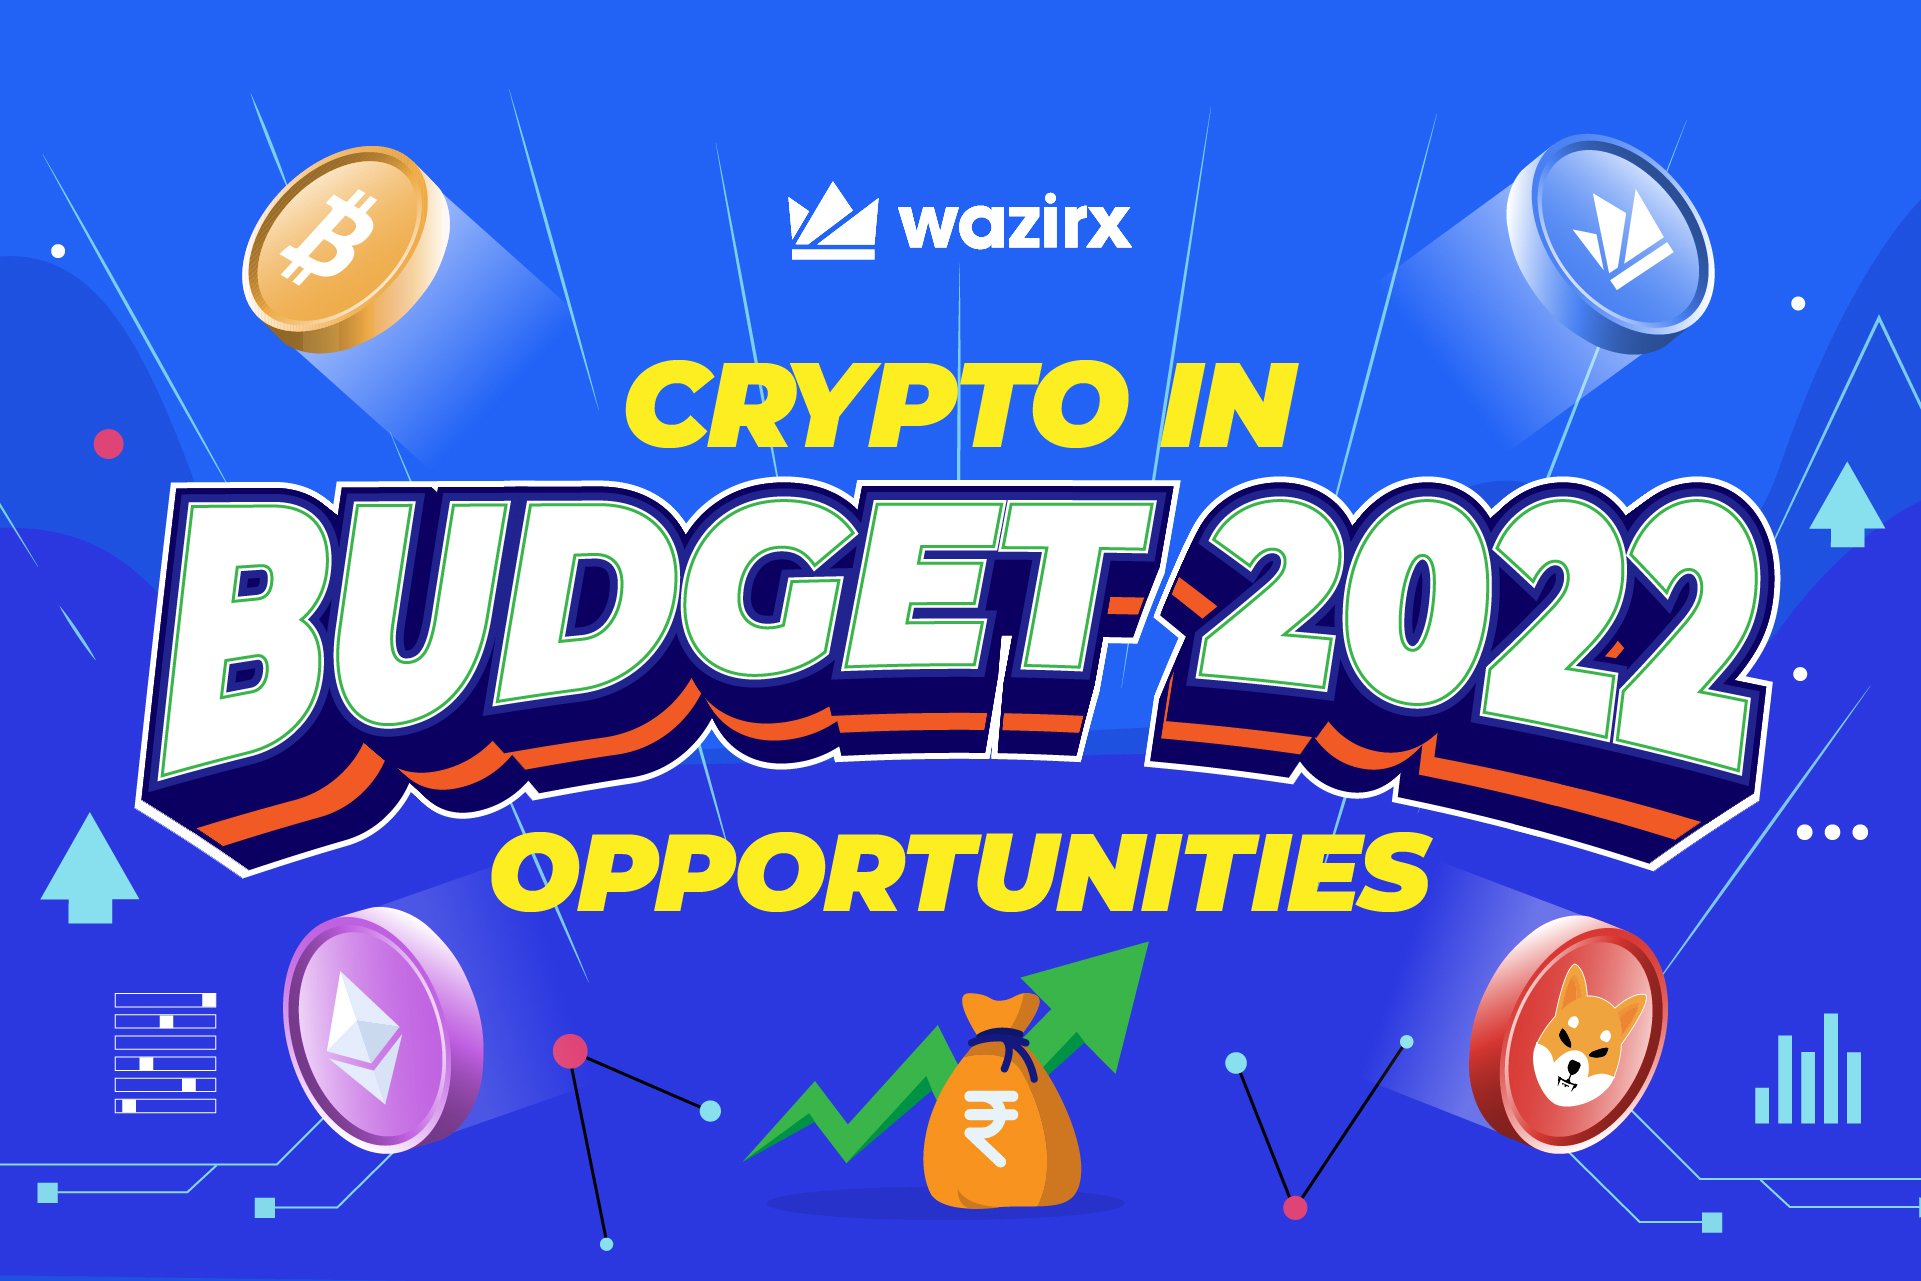 You are currently viewing 2022 Budget has the potential to create career opportunities for India in Web3